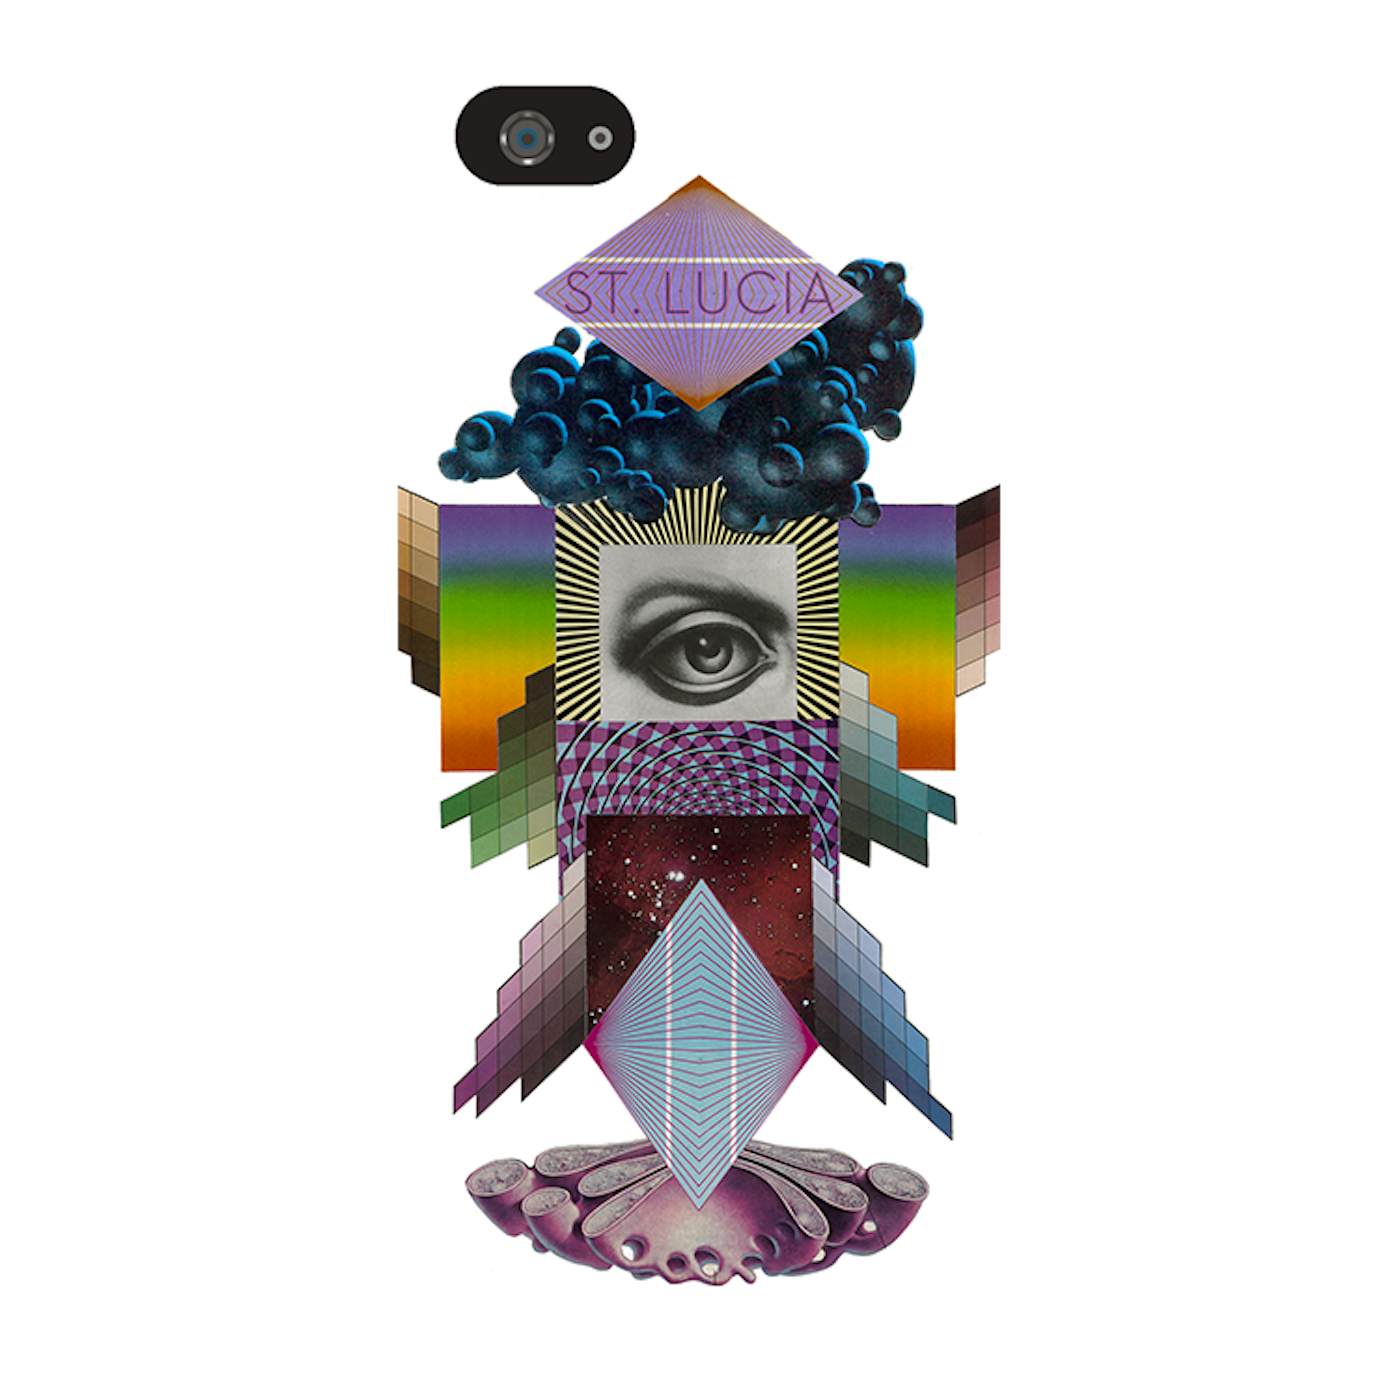 St. Lucia iPhone 5 Case